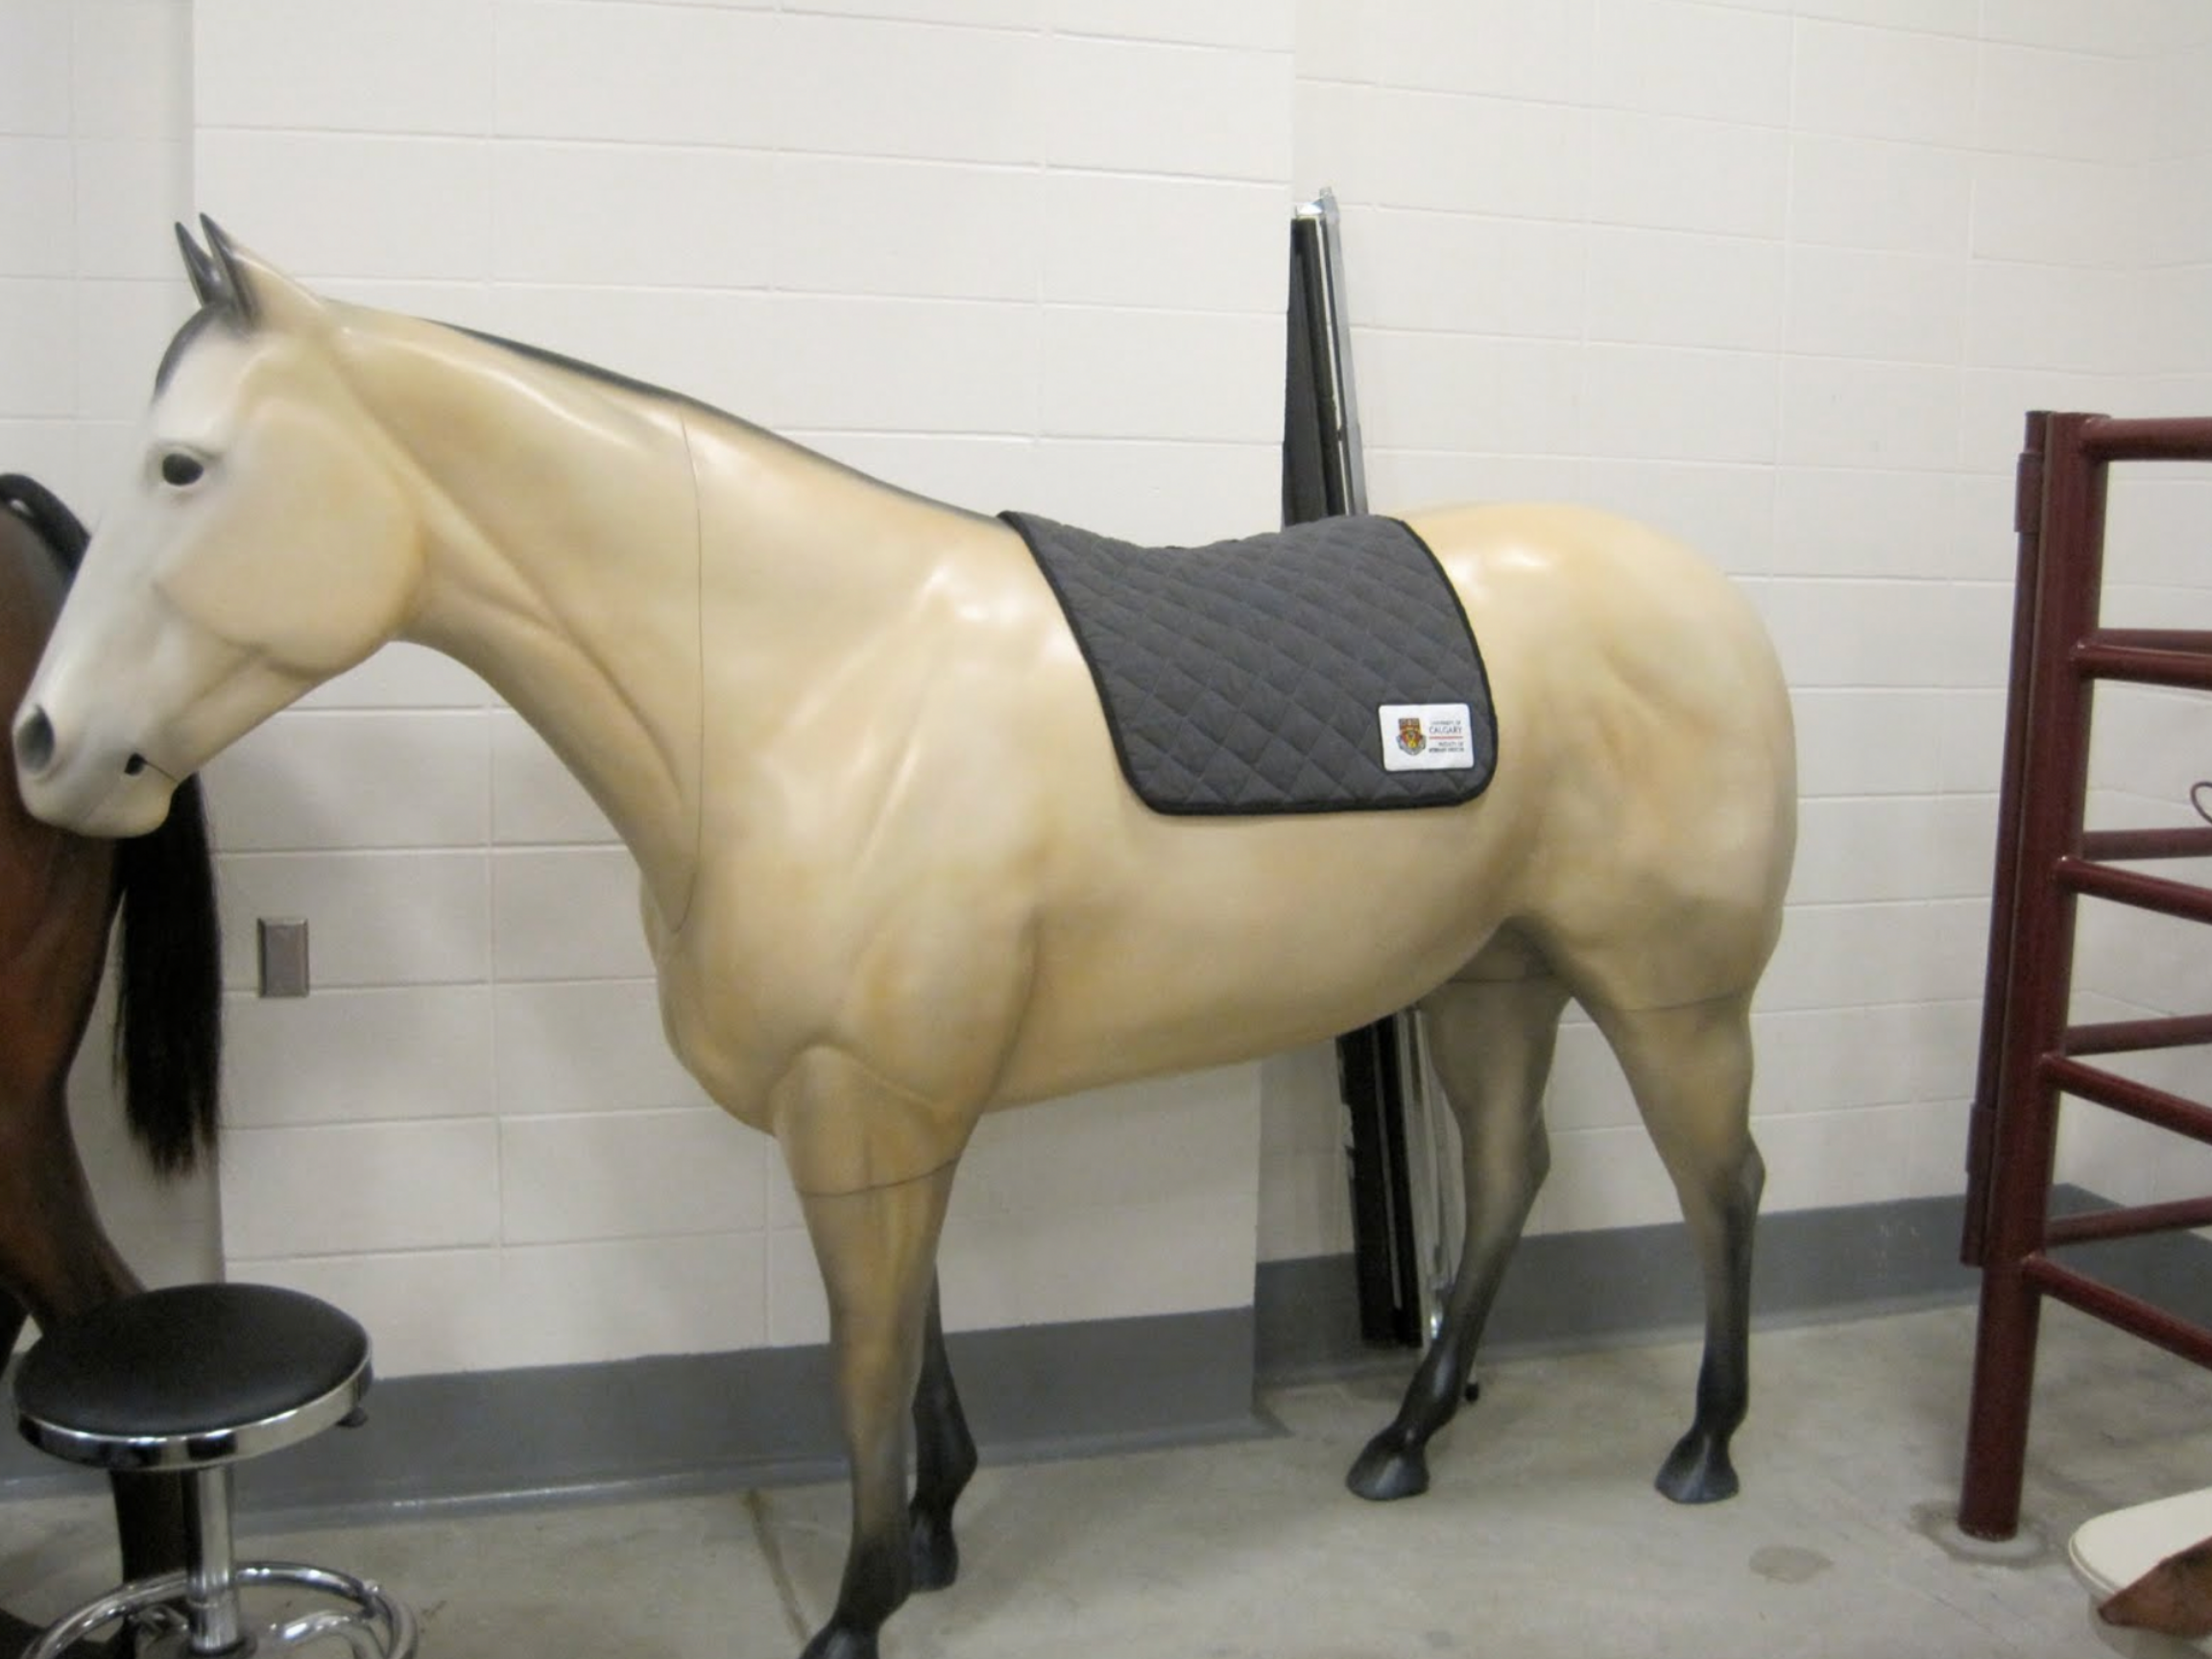  One of the finished prototype units being used at the University of Calgary Veterinary School. It has a simulated rectum, anus, and vagina, as well as a reproduction pelvis. The unit also has a belly tap function and provisions for using real equine